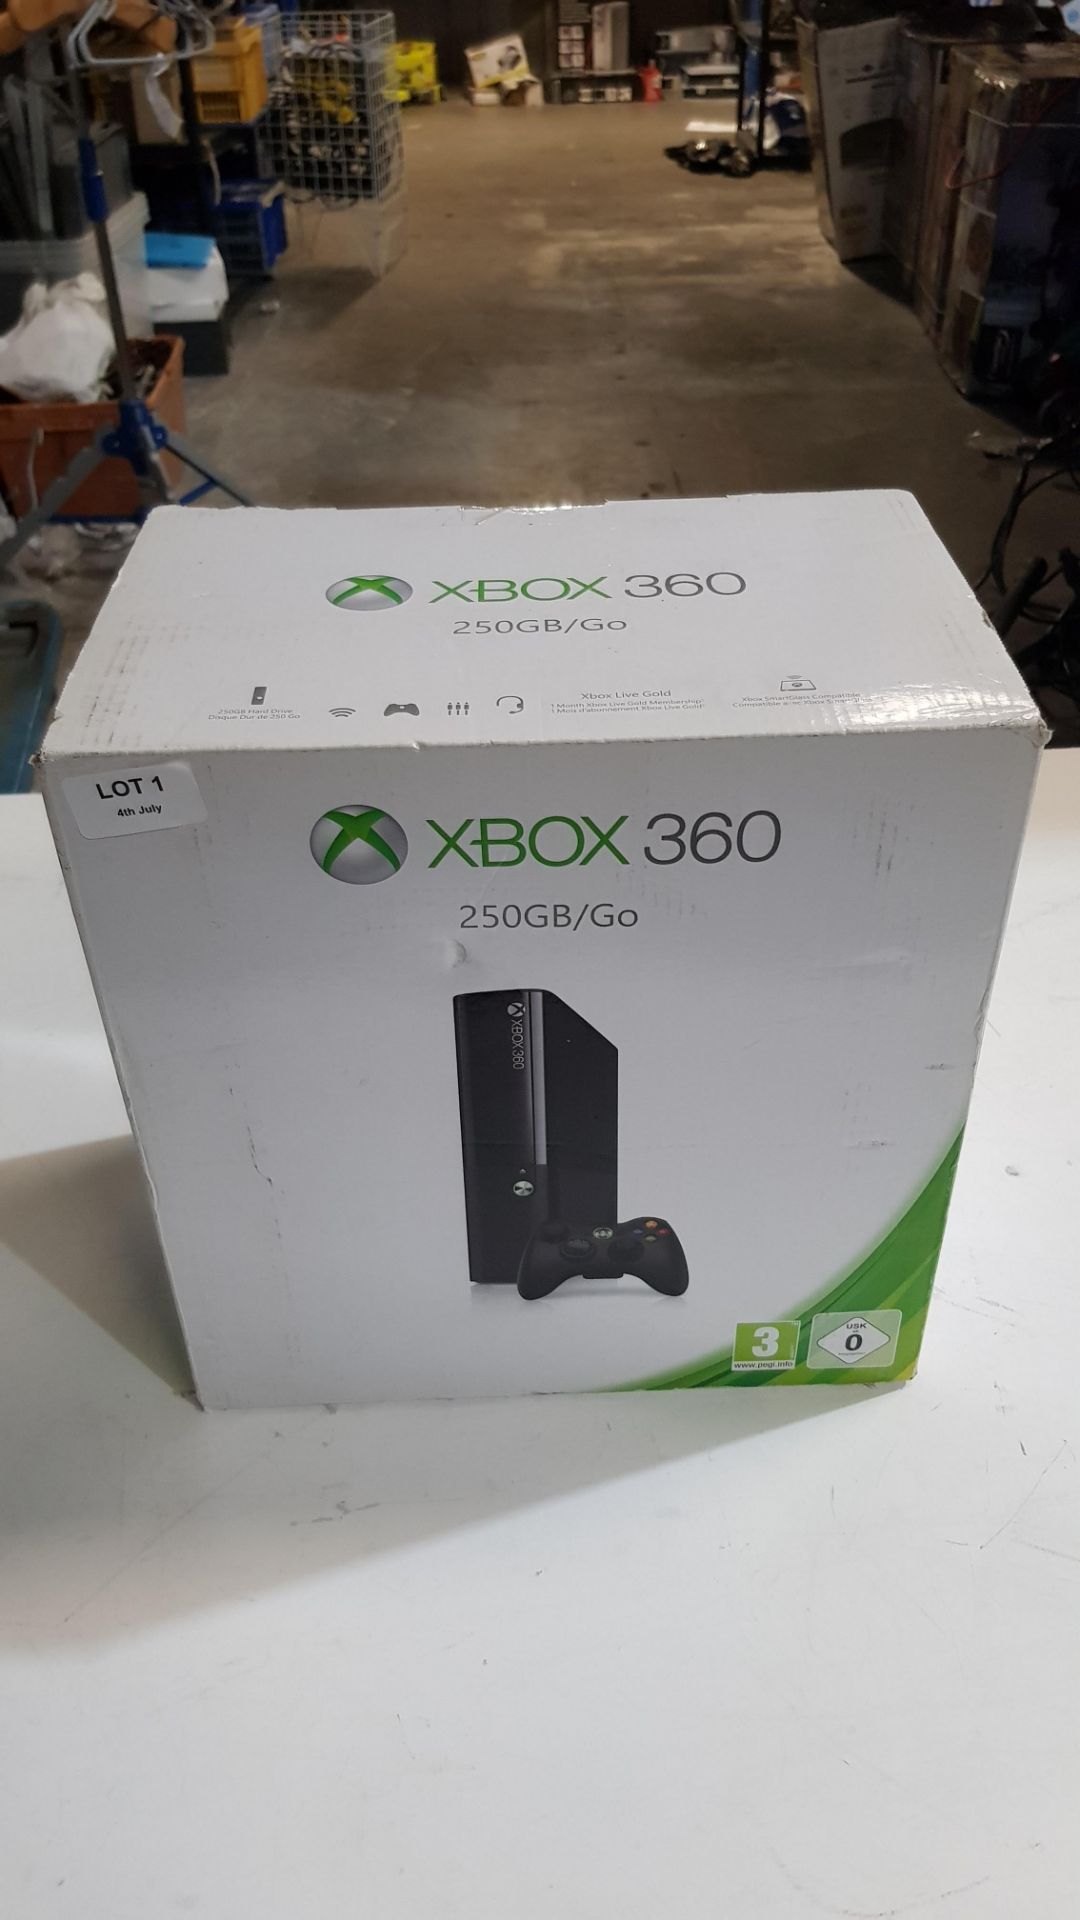 1x Xbox 360 250GB Go. New, Sealed Unit. Opened For Contents Photograph. - Image 2 of 8